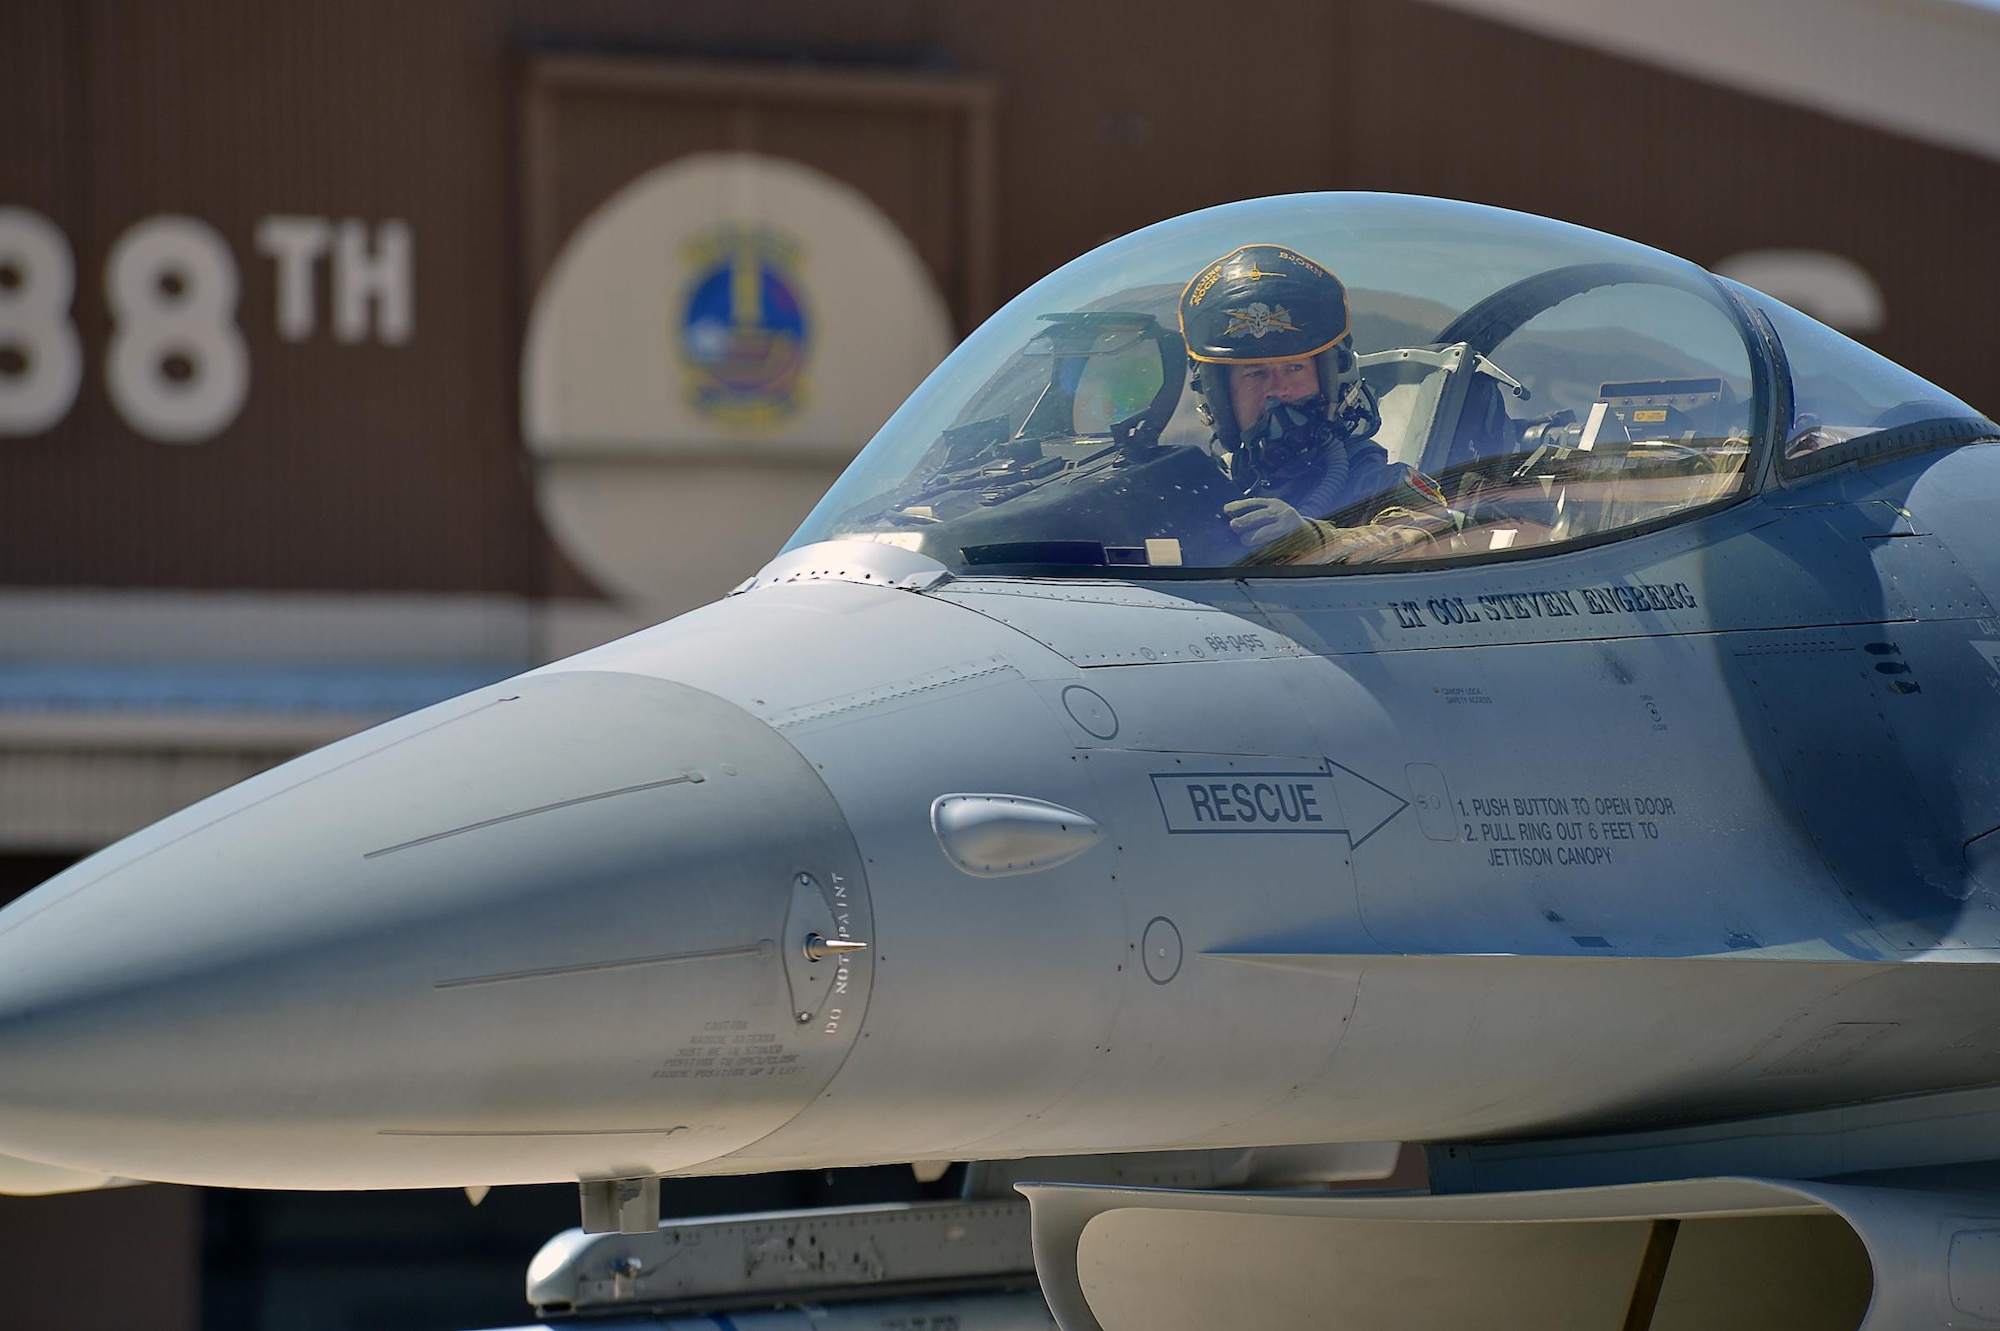 Lt. Col. Steven Engberg, 4th Fighter Squadron commander, after a ‘Fightin' Fuujins’ fini flight May 31, 2016, at Hill Air Force Base, Utah. (Air Force photo by R. Nial Bradshaw)